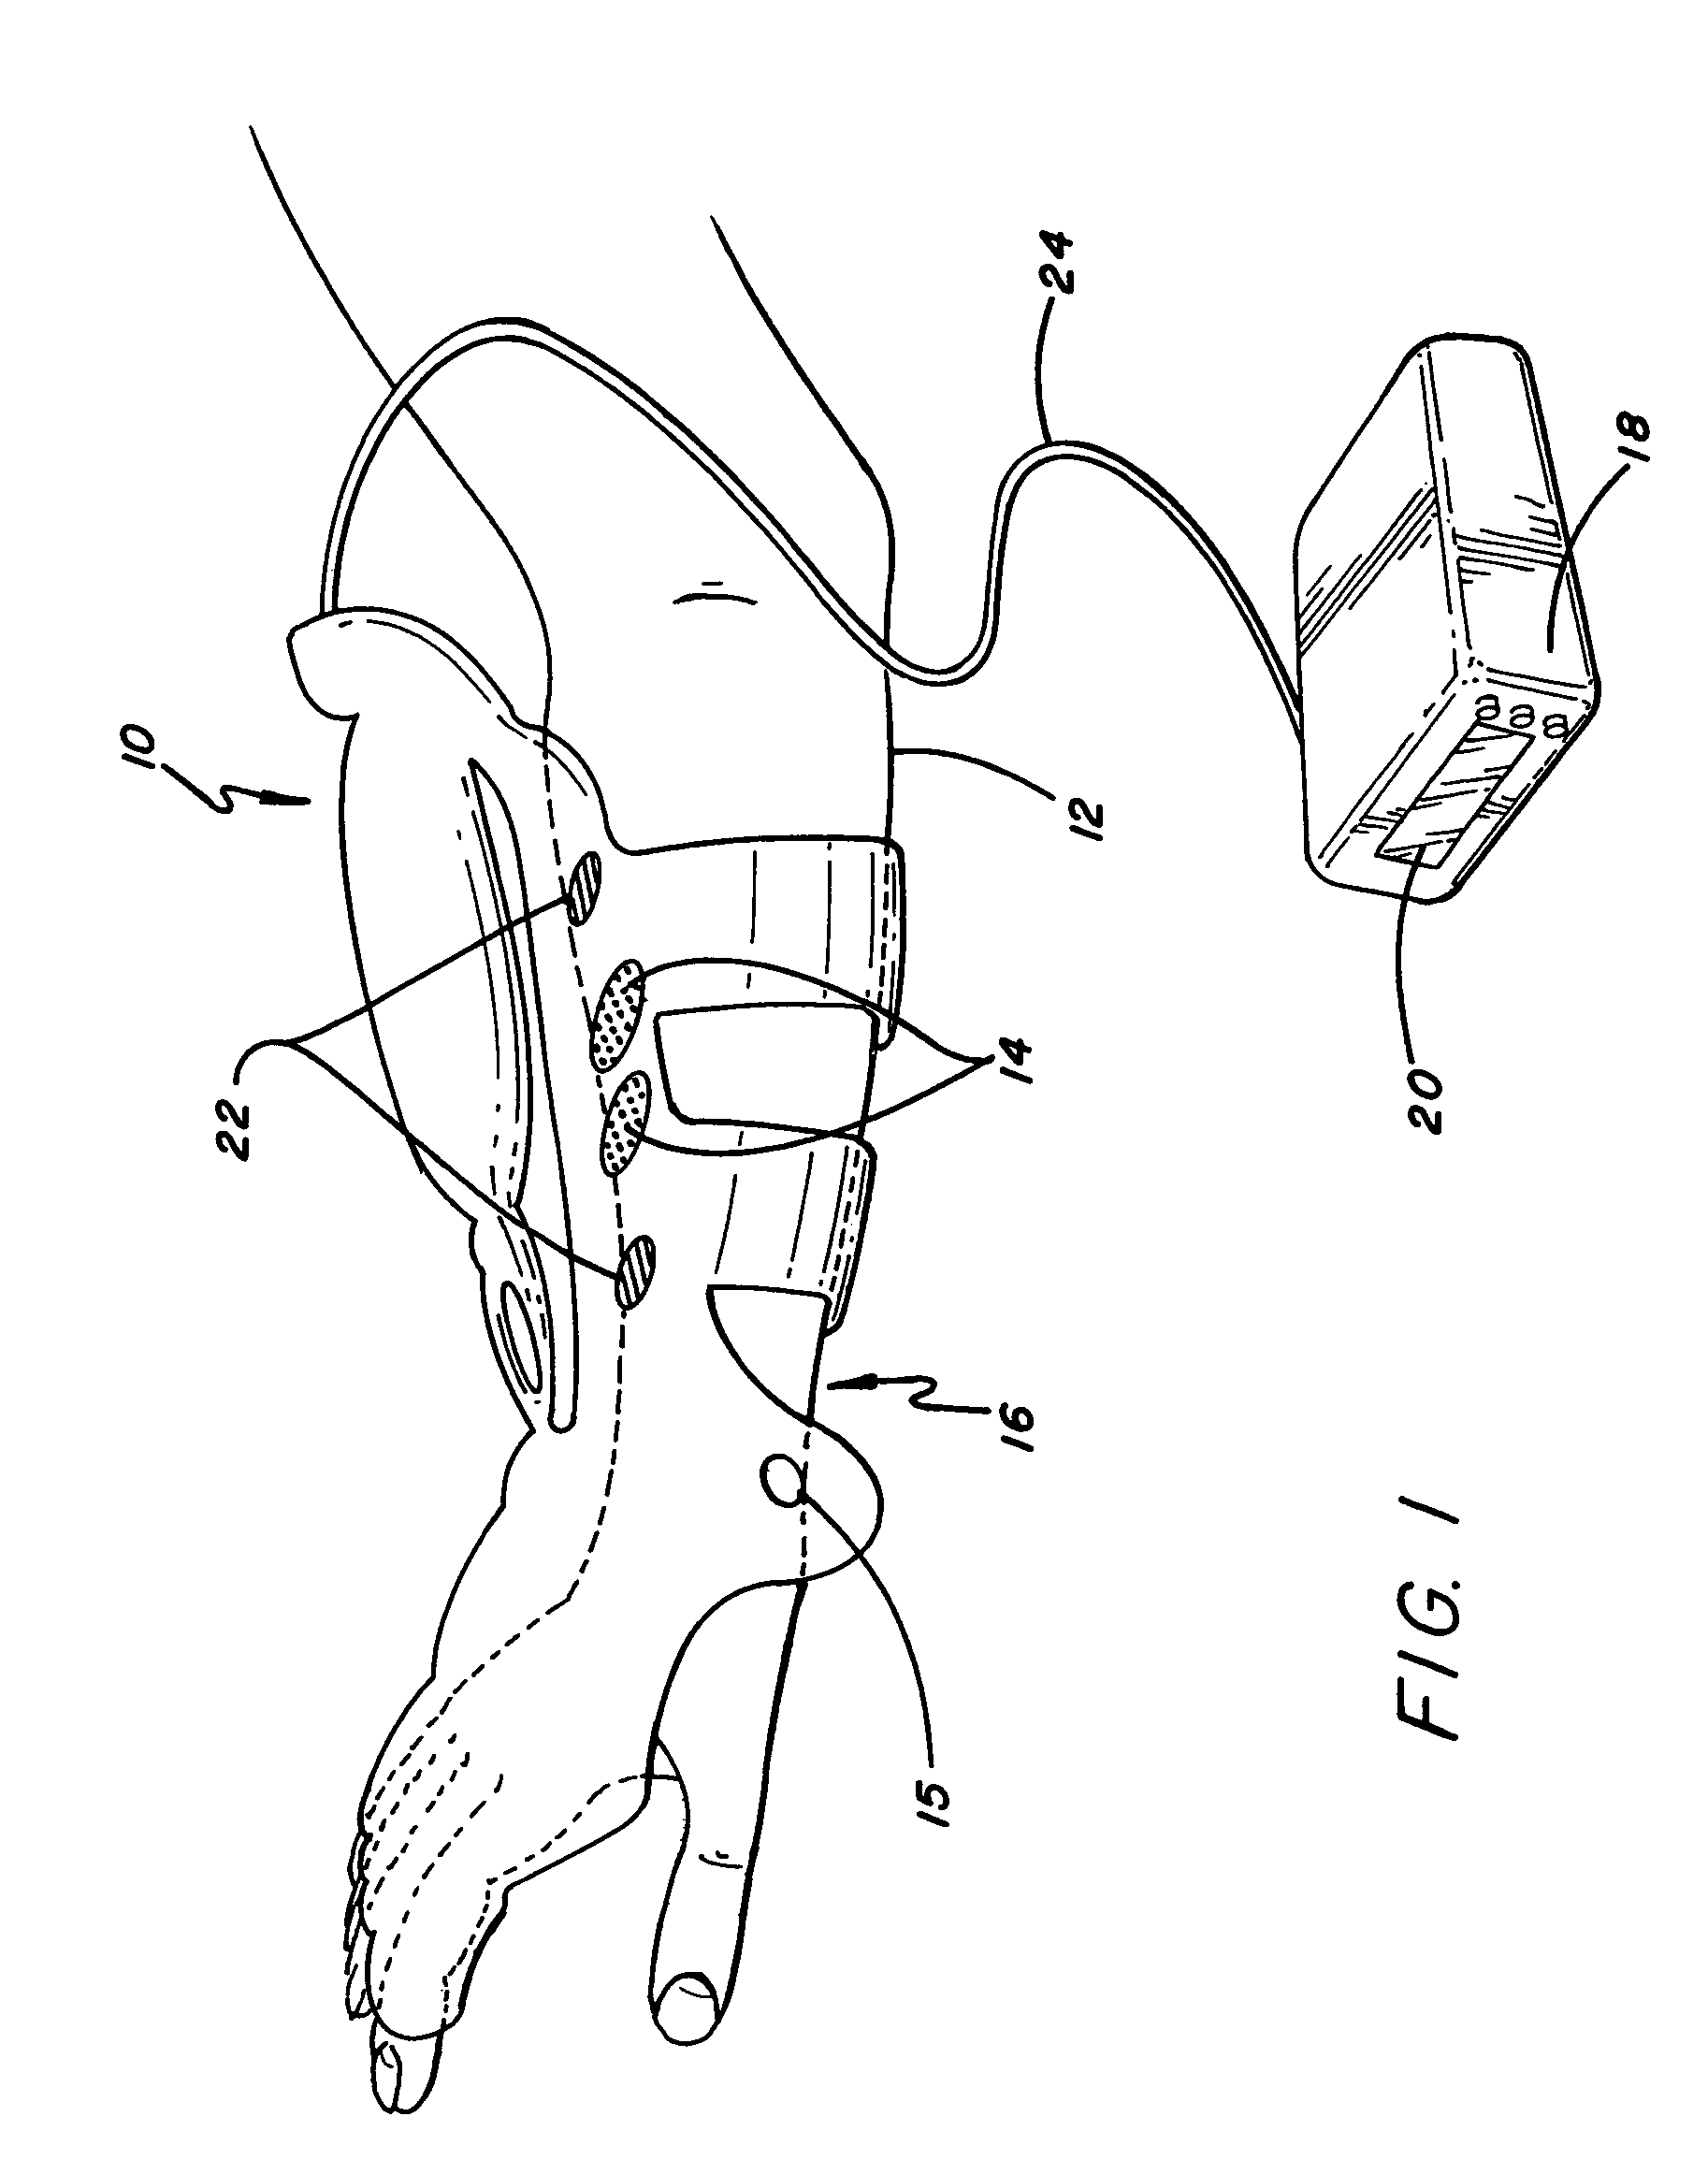 System and method for neuromuscular reeducation